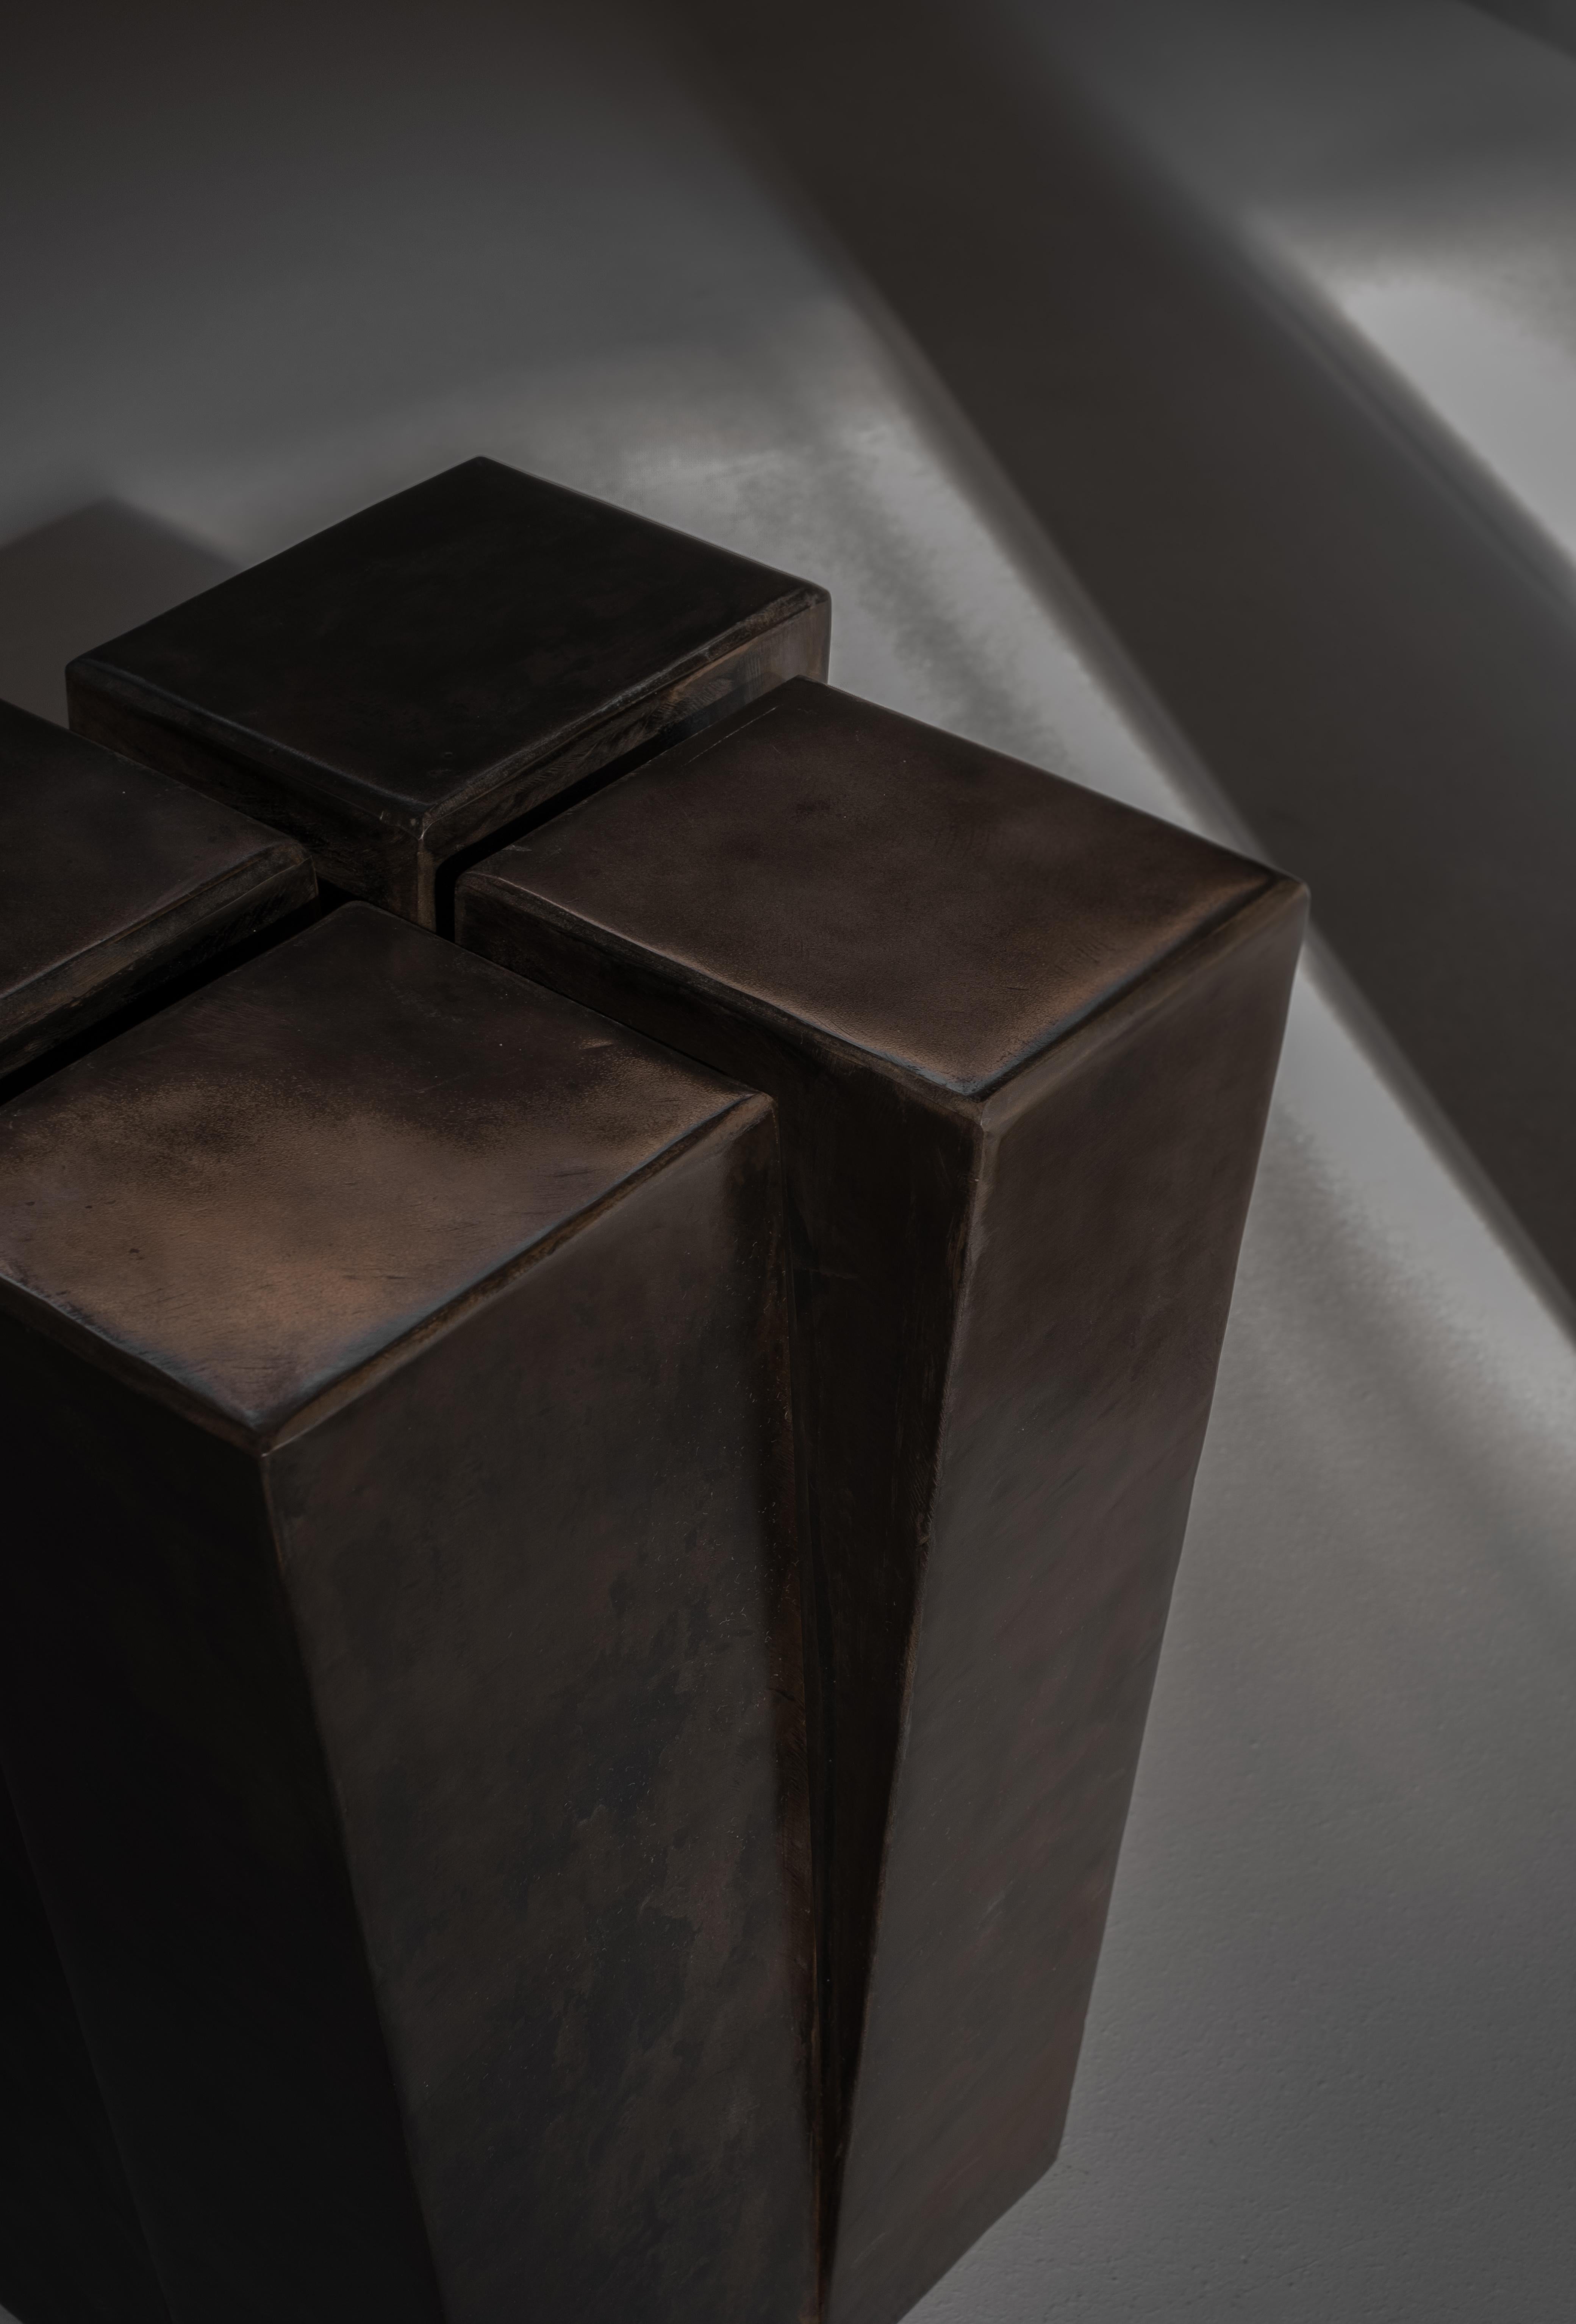 Four legs steel signed stool, Arno Declercq


Measures: 34cm L x 34cm W x 50 cm H 13,4” L x 13,4” W x 20” H

Material: patinated steel 

Signed by Arno Declercq

Arno Declercq
Belgian designer and art dealer who makes bespoke objects with